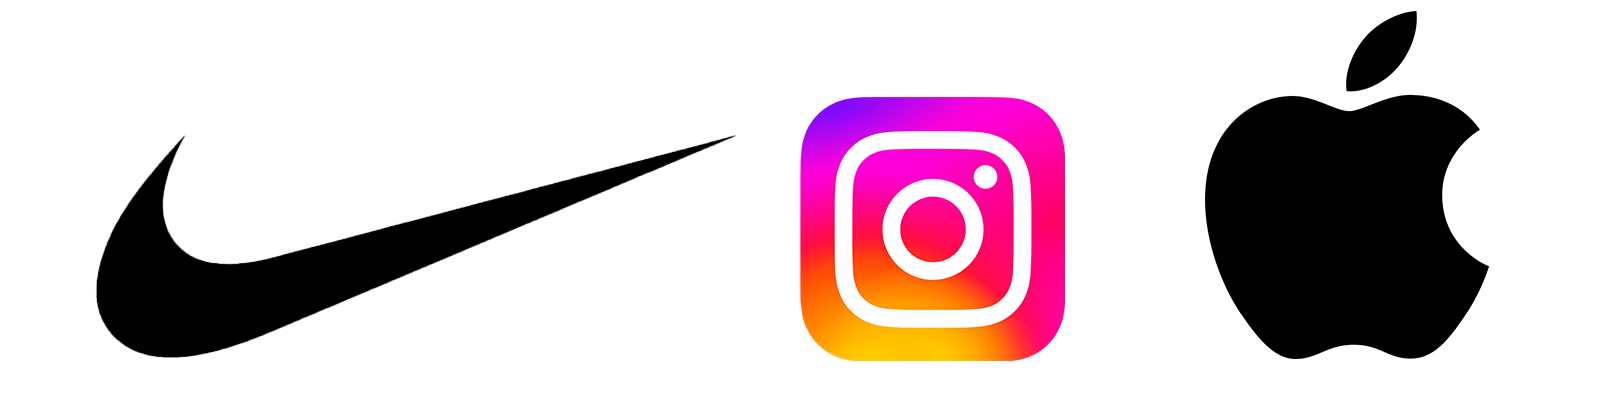 Nike, Instagram and Apple computer logotypes